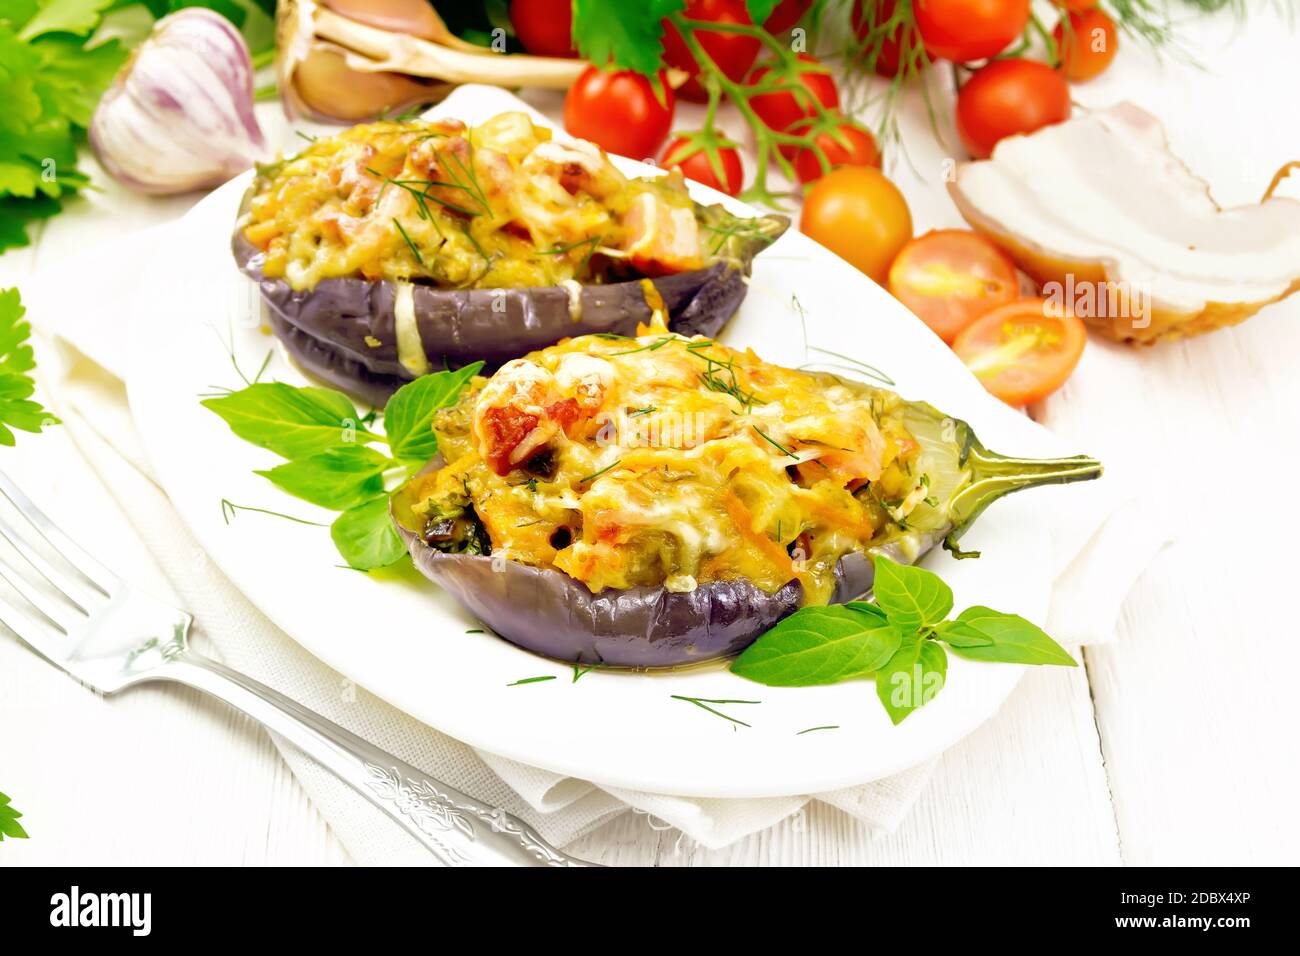 Stuffed eggplant with smoked bacon, tomatoes, onions, carrots with garlic, cheese and herbs in an oval plate on a napkin on wooden board background Stock Photo